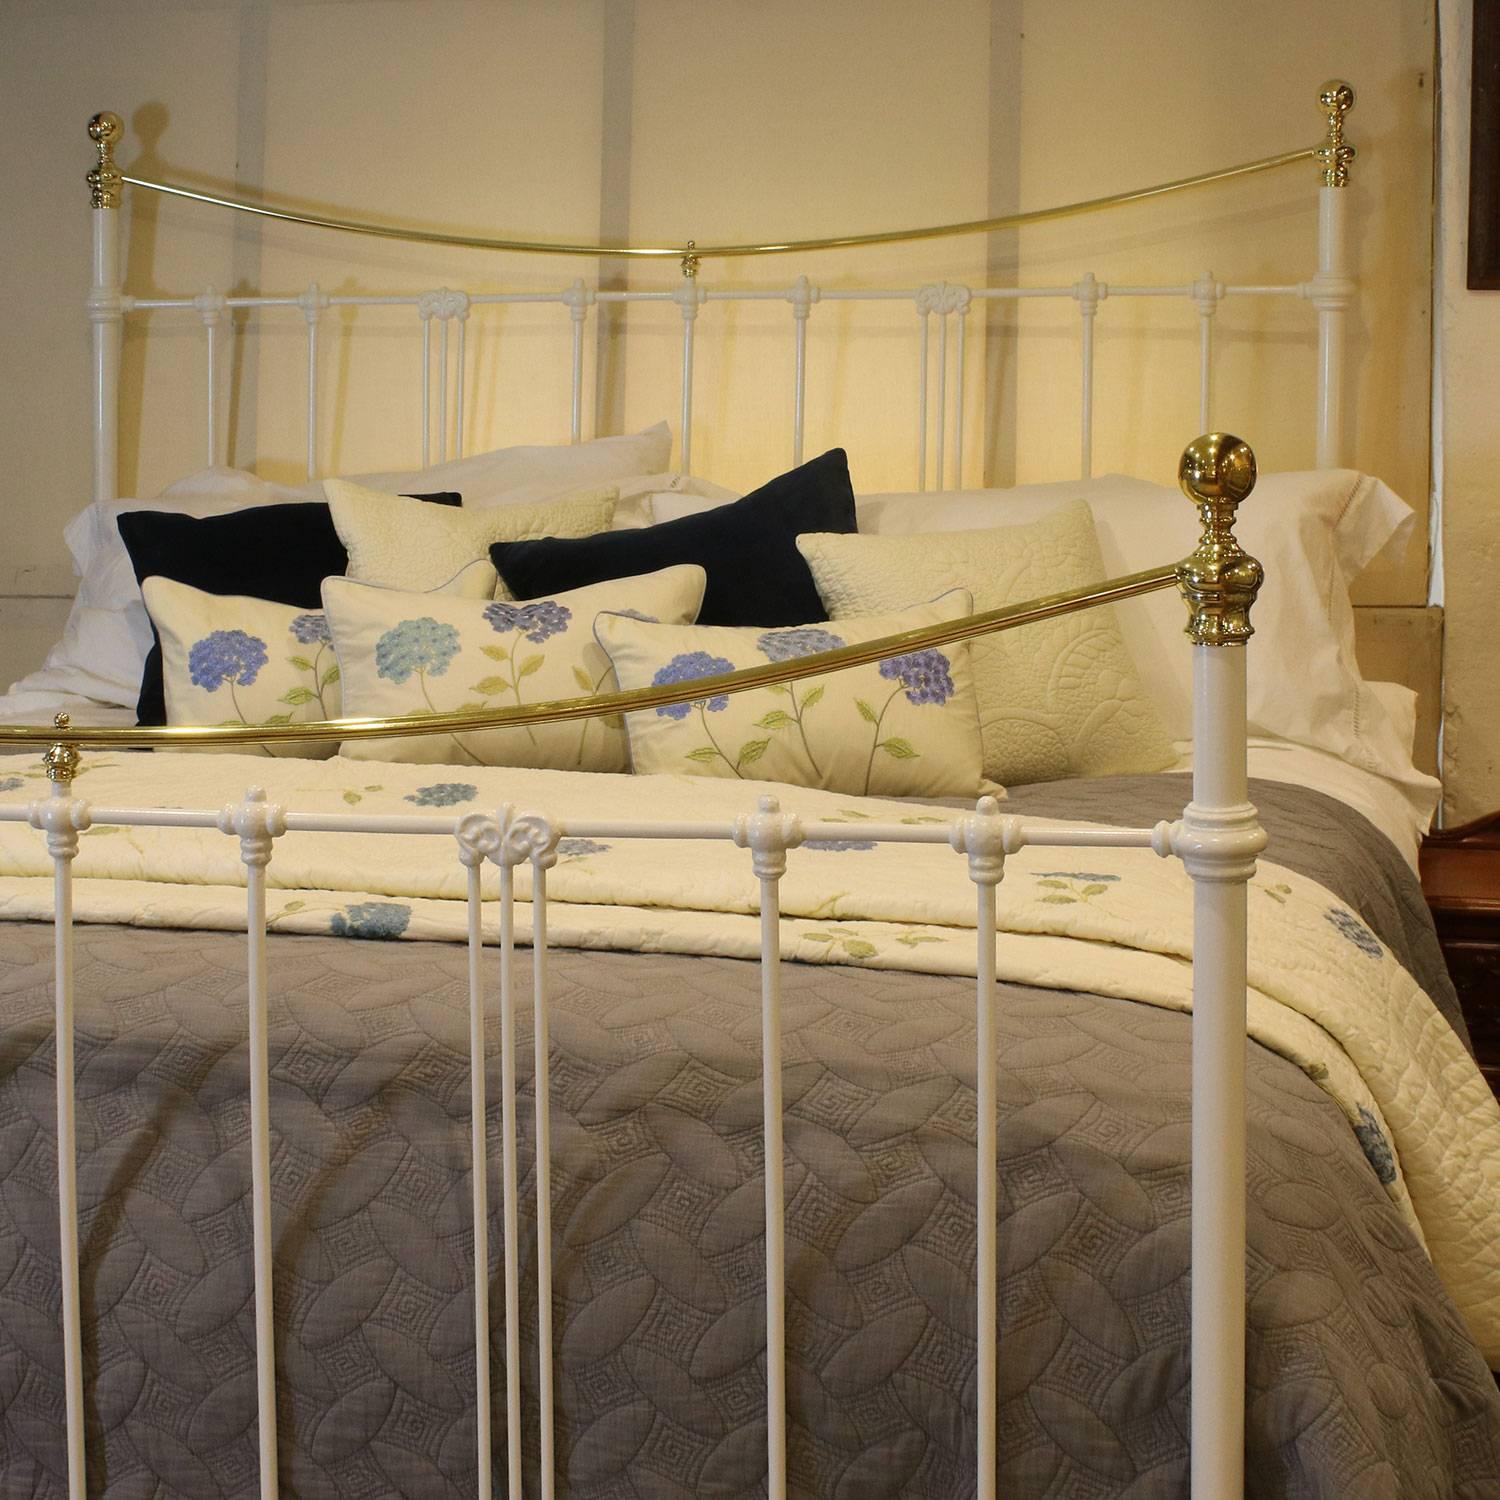 A brass and iron bed with a curved top rail and art nouveau castings, finished in white.

This bed accepts a British Super king-size or Californian King (6ft, 72 inches or 180cm wide) base and mattress set.

The price is for the bed frame alone.